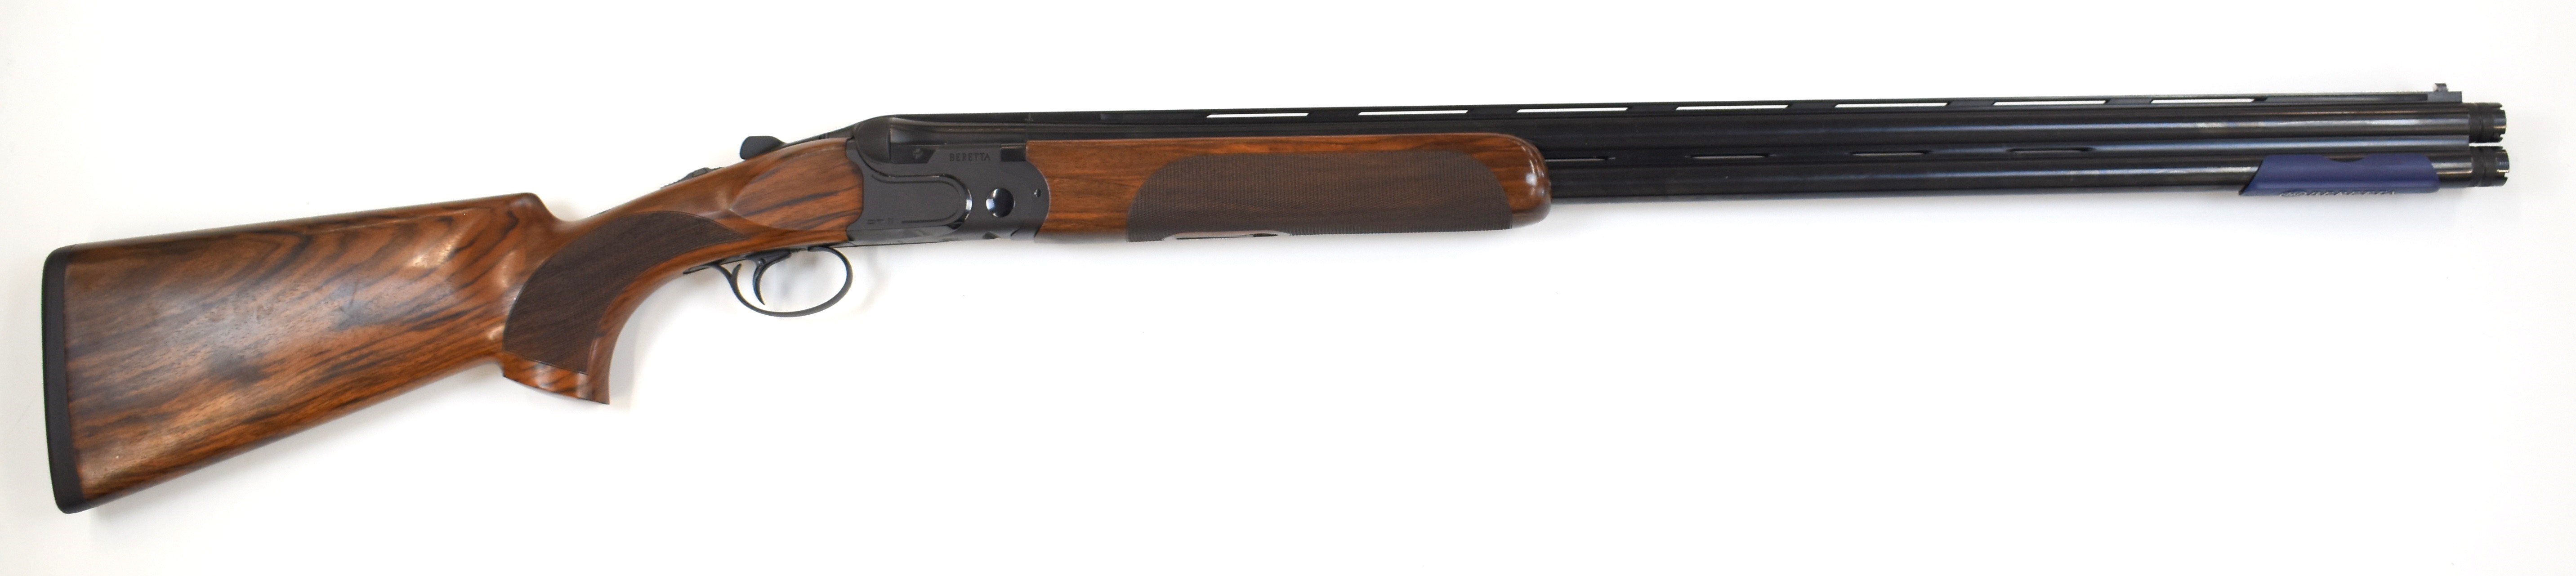 Beretta DT11 Sporting GMK 50th Anniversary Special Edition 12 bore over and under ejector shotgun - Image 2 of 13